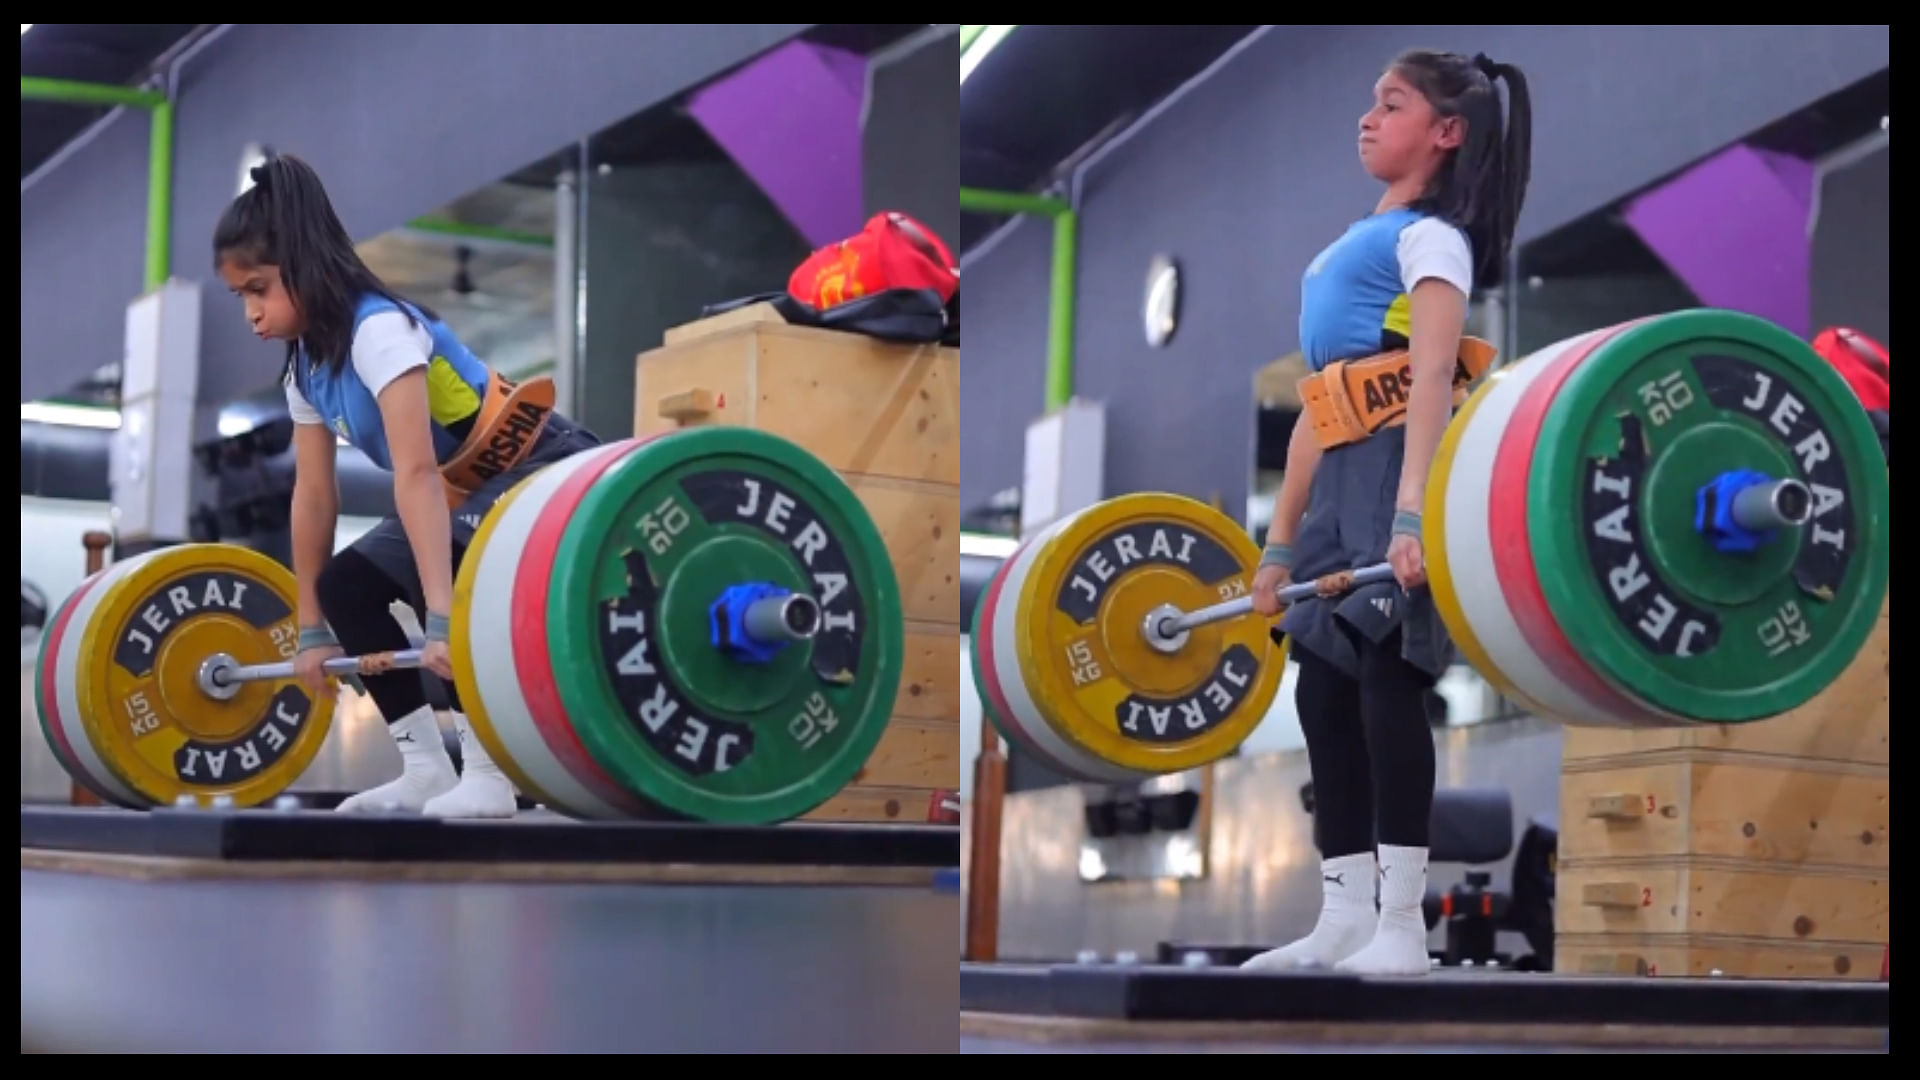 World youngest weightlifter 9 year old haryana girl arshia goswami stuns internet with lifts 75 kg weight